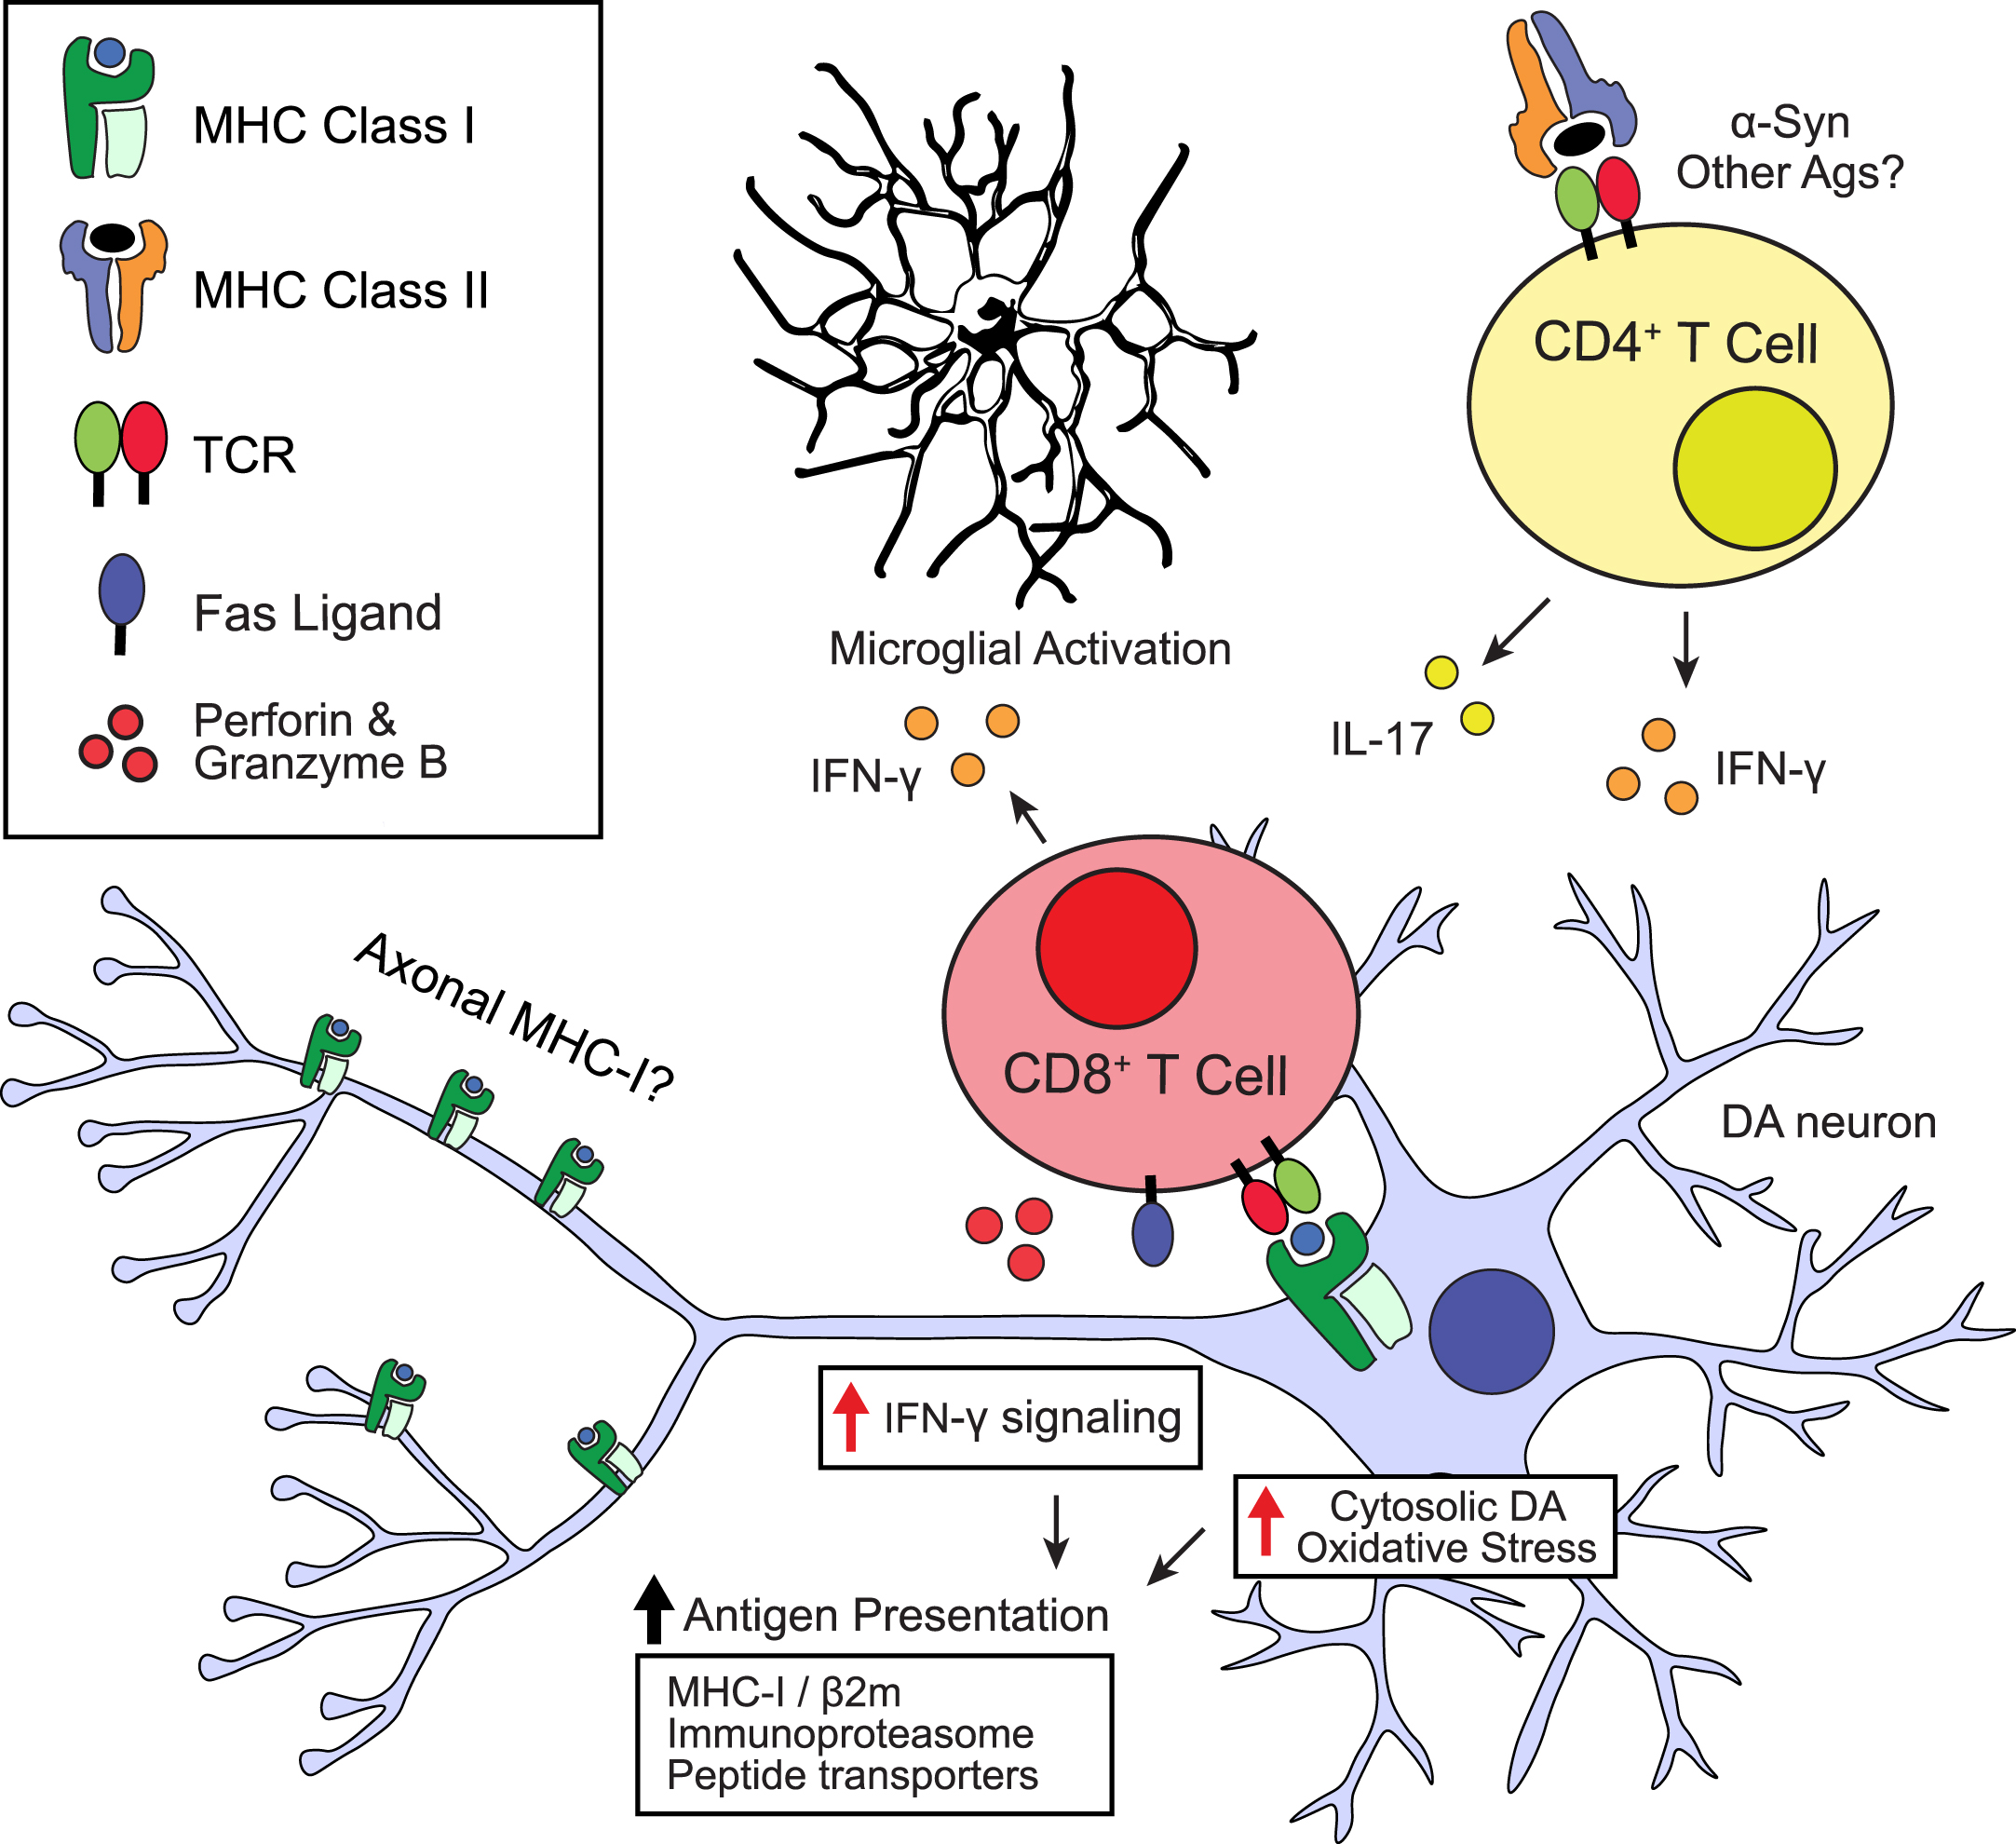 Possible roles of neuronal antigen presentation in Parkinson’s disease. Schematic depicting potential stimuli leading to MHC-I upregulation and antigen presentation in dopamine neurons and possible downstream consequences. TCR, T cell receptor; DA, dopamine; Ags, antigens.